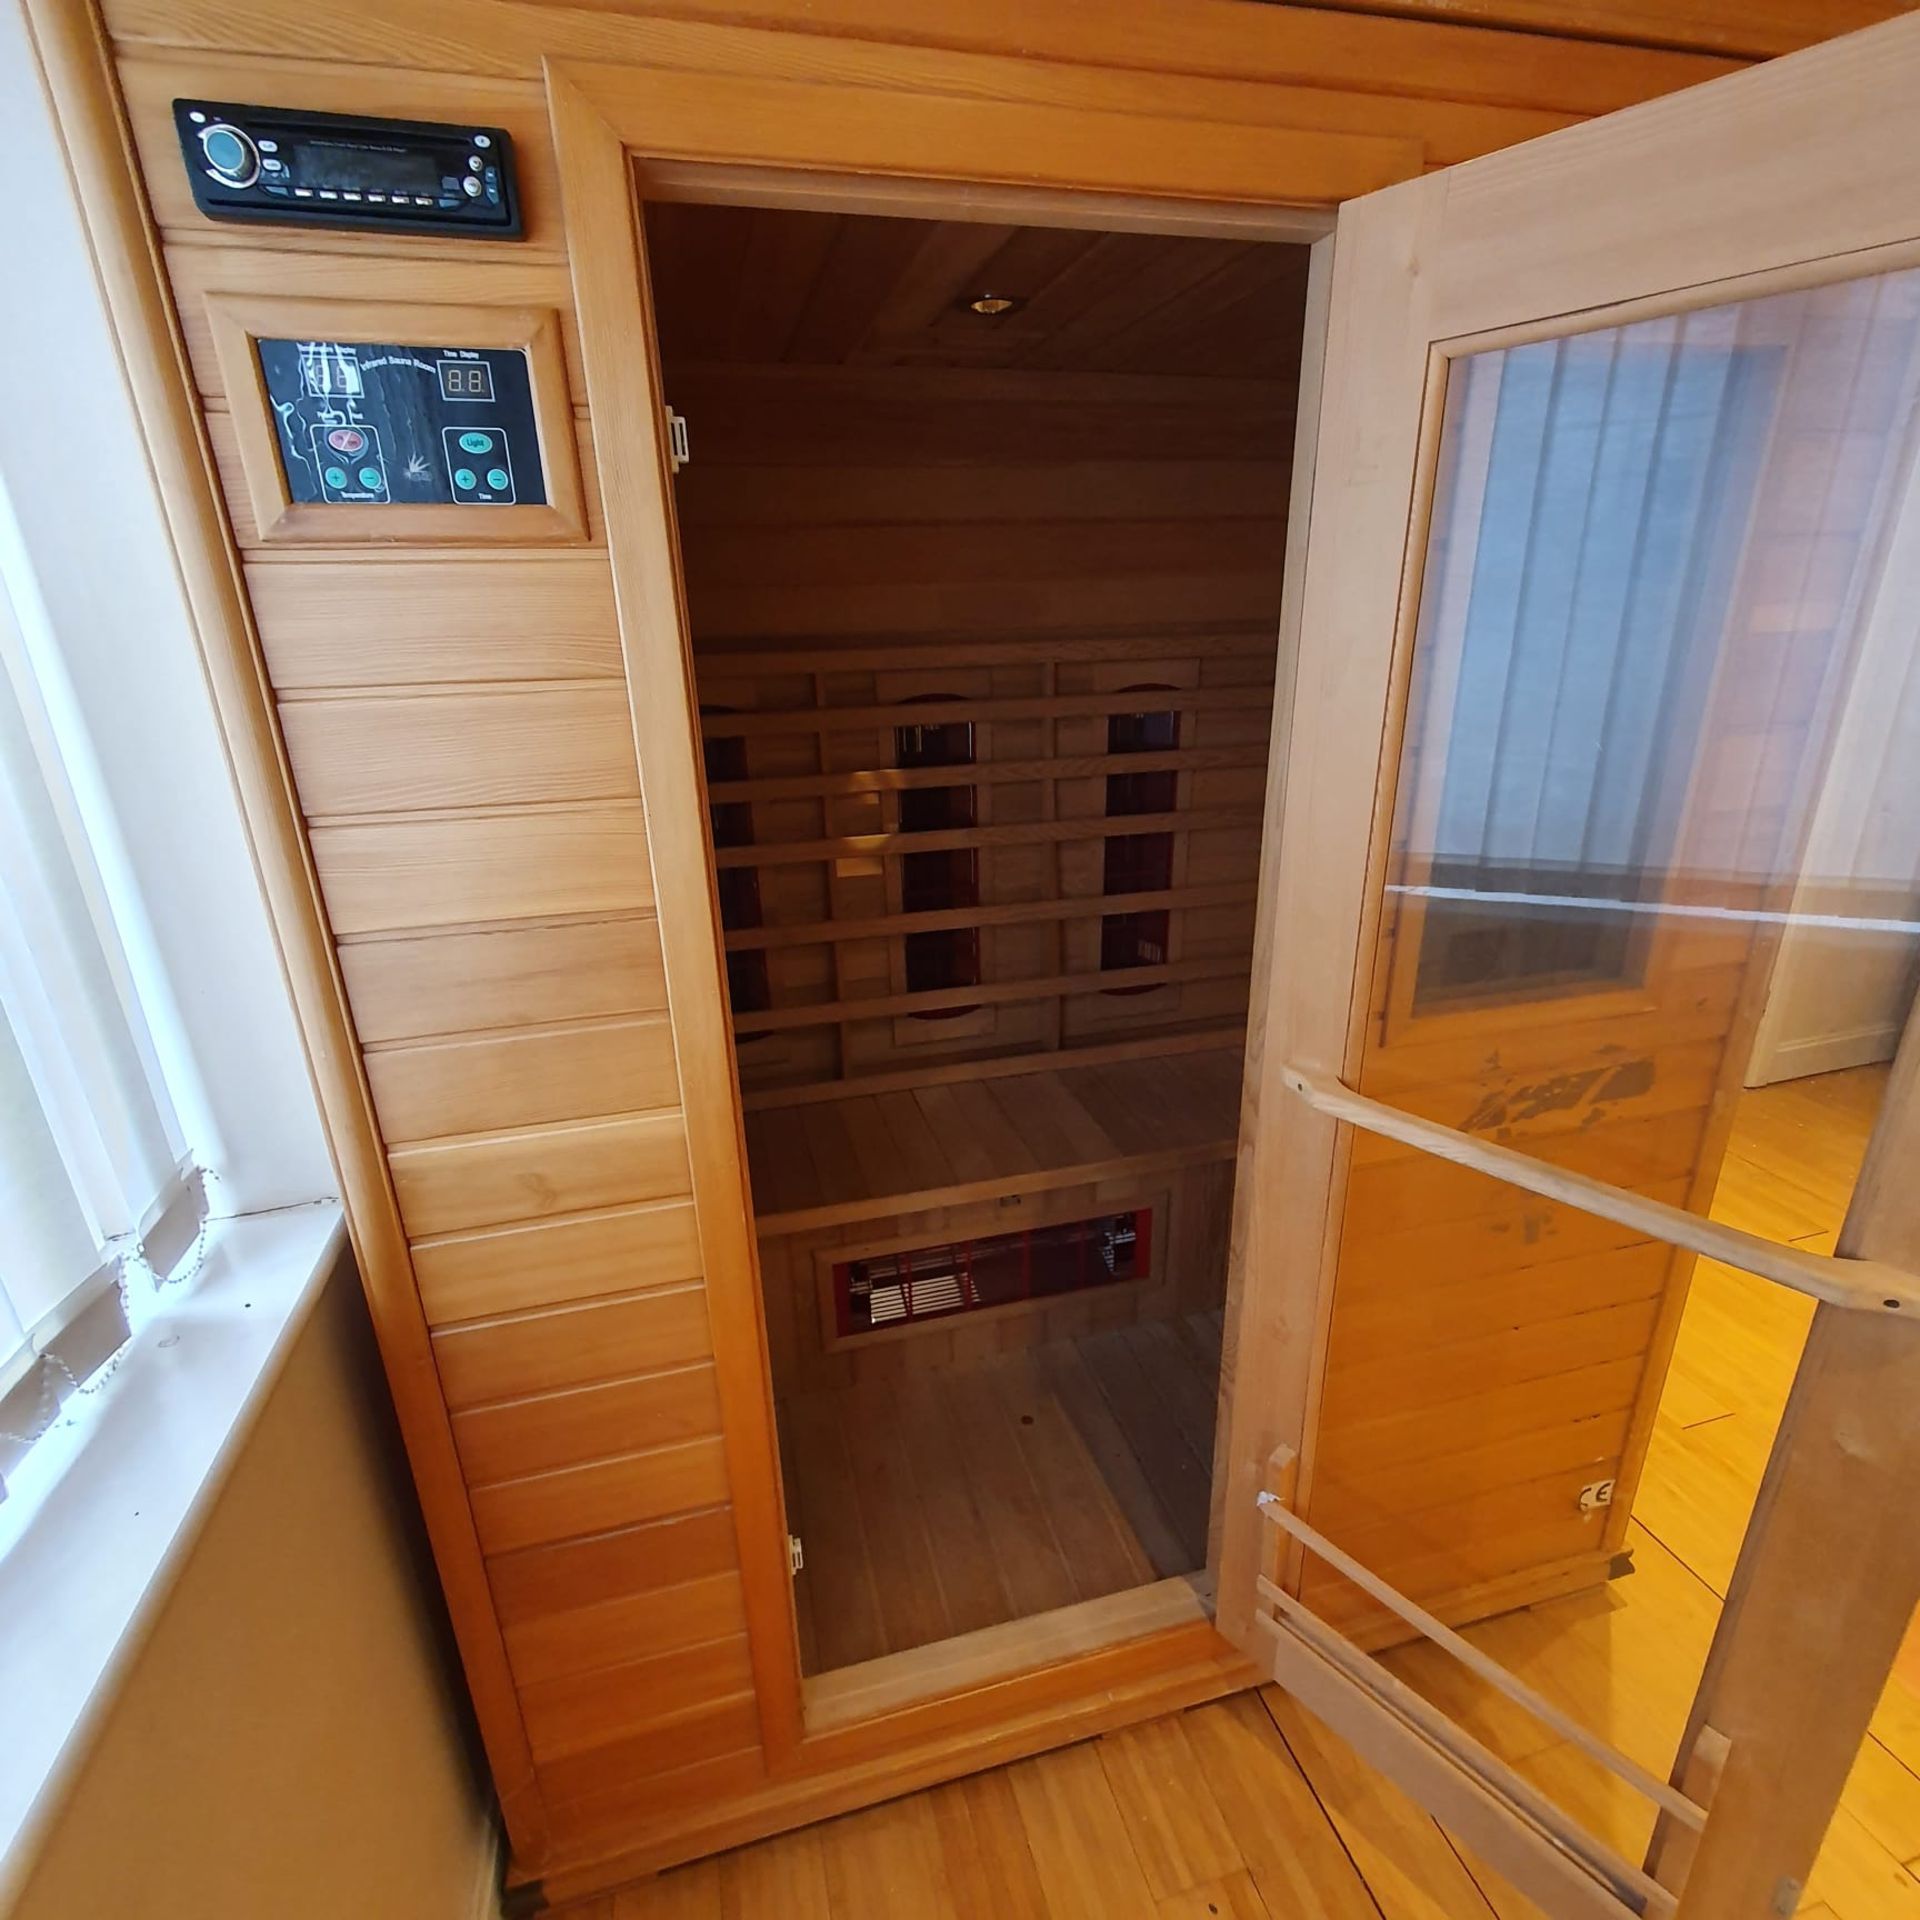 Infrared Sauna Room with Music System. Approx 1550mm Width, 1100mm Deep, 1900mm High. - Image 3 of 10